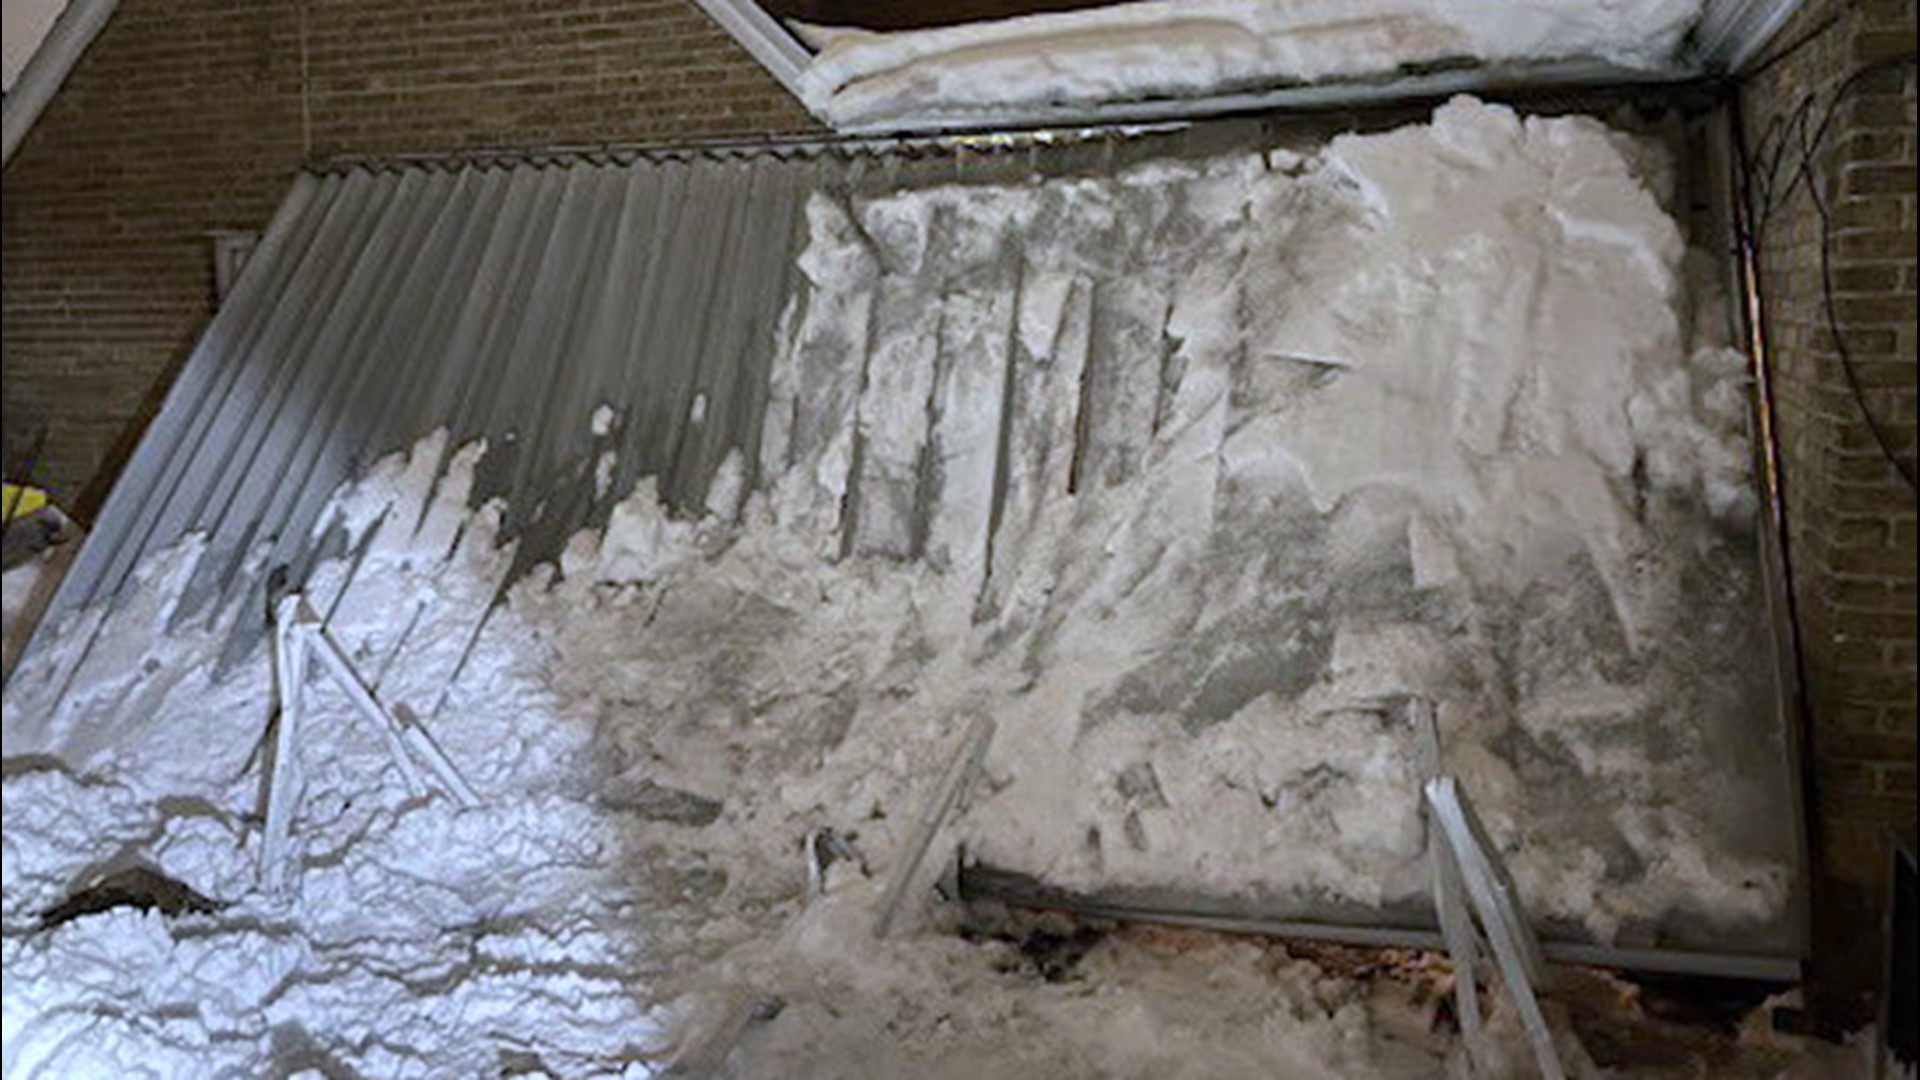 A woman was shoveling snow out of her home until the canopy above her collapsed due to heavy snow and ice. Firefighters rushed to the scene to rescue her on Feb. 23.